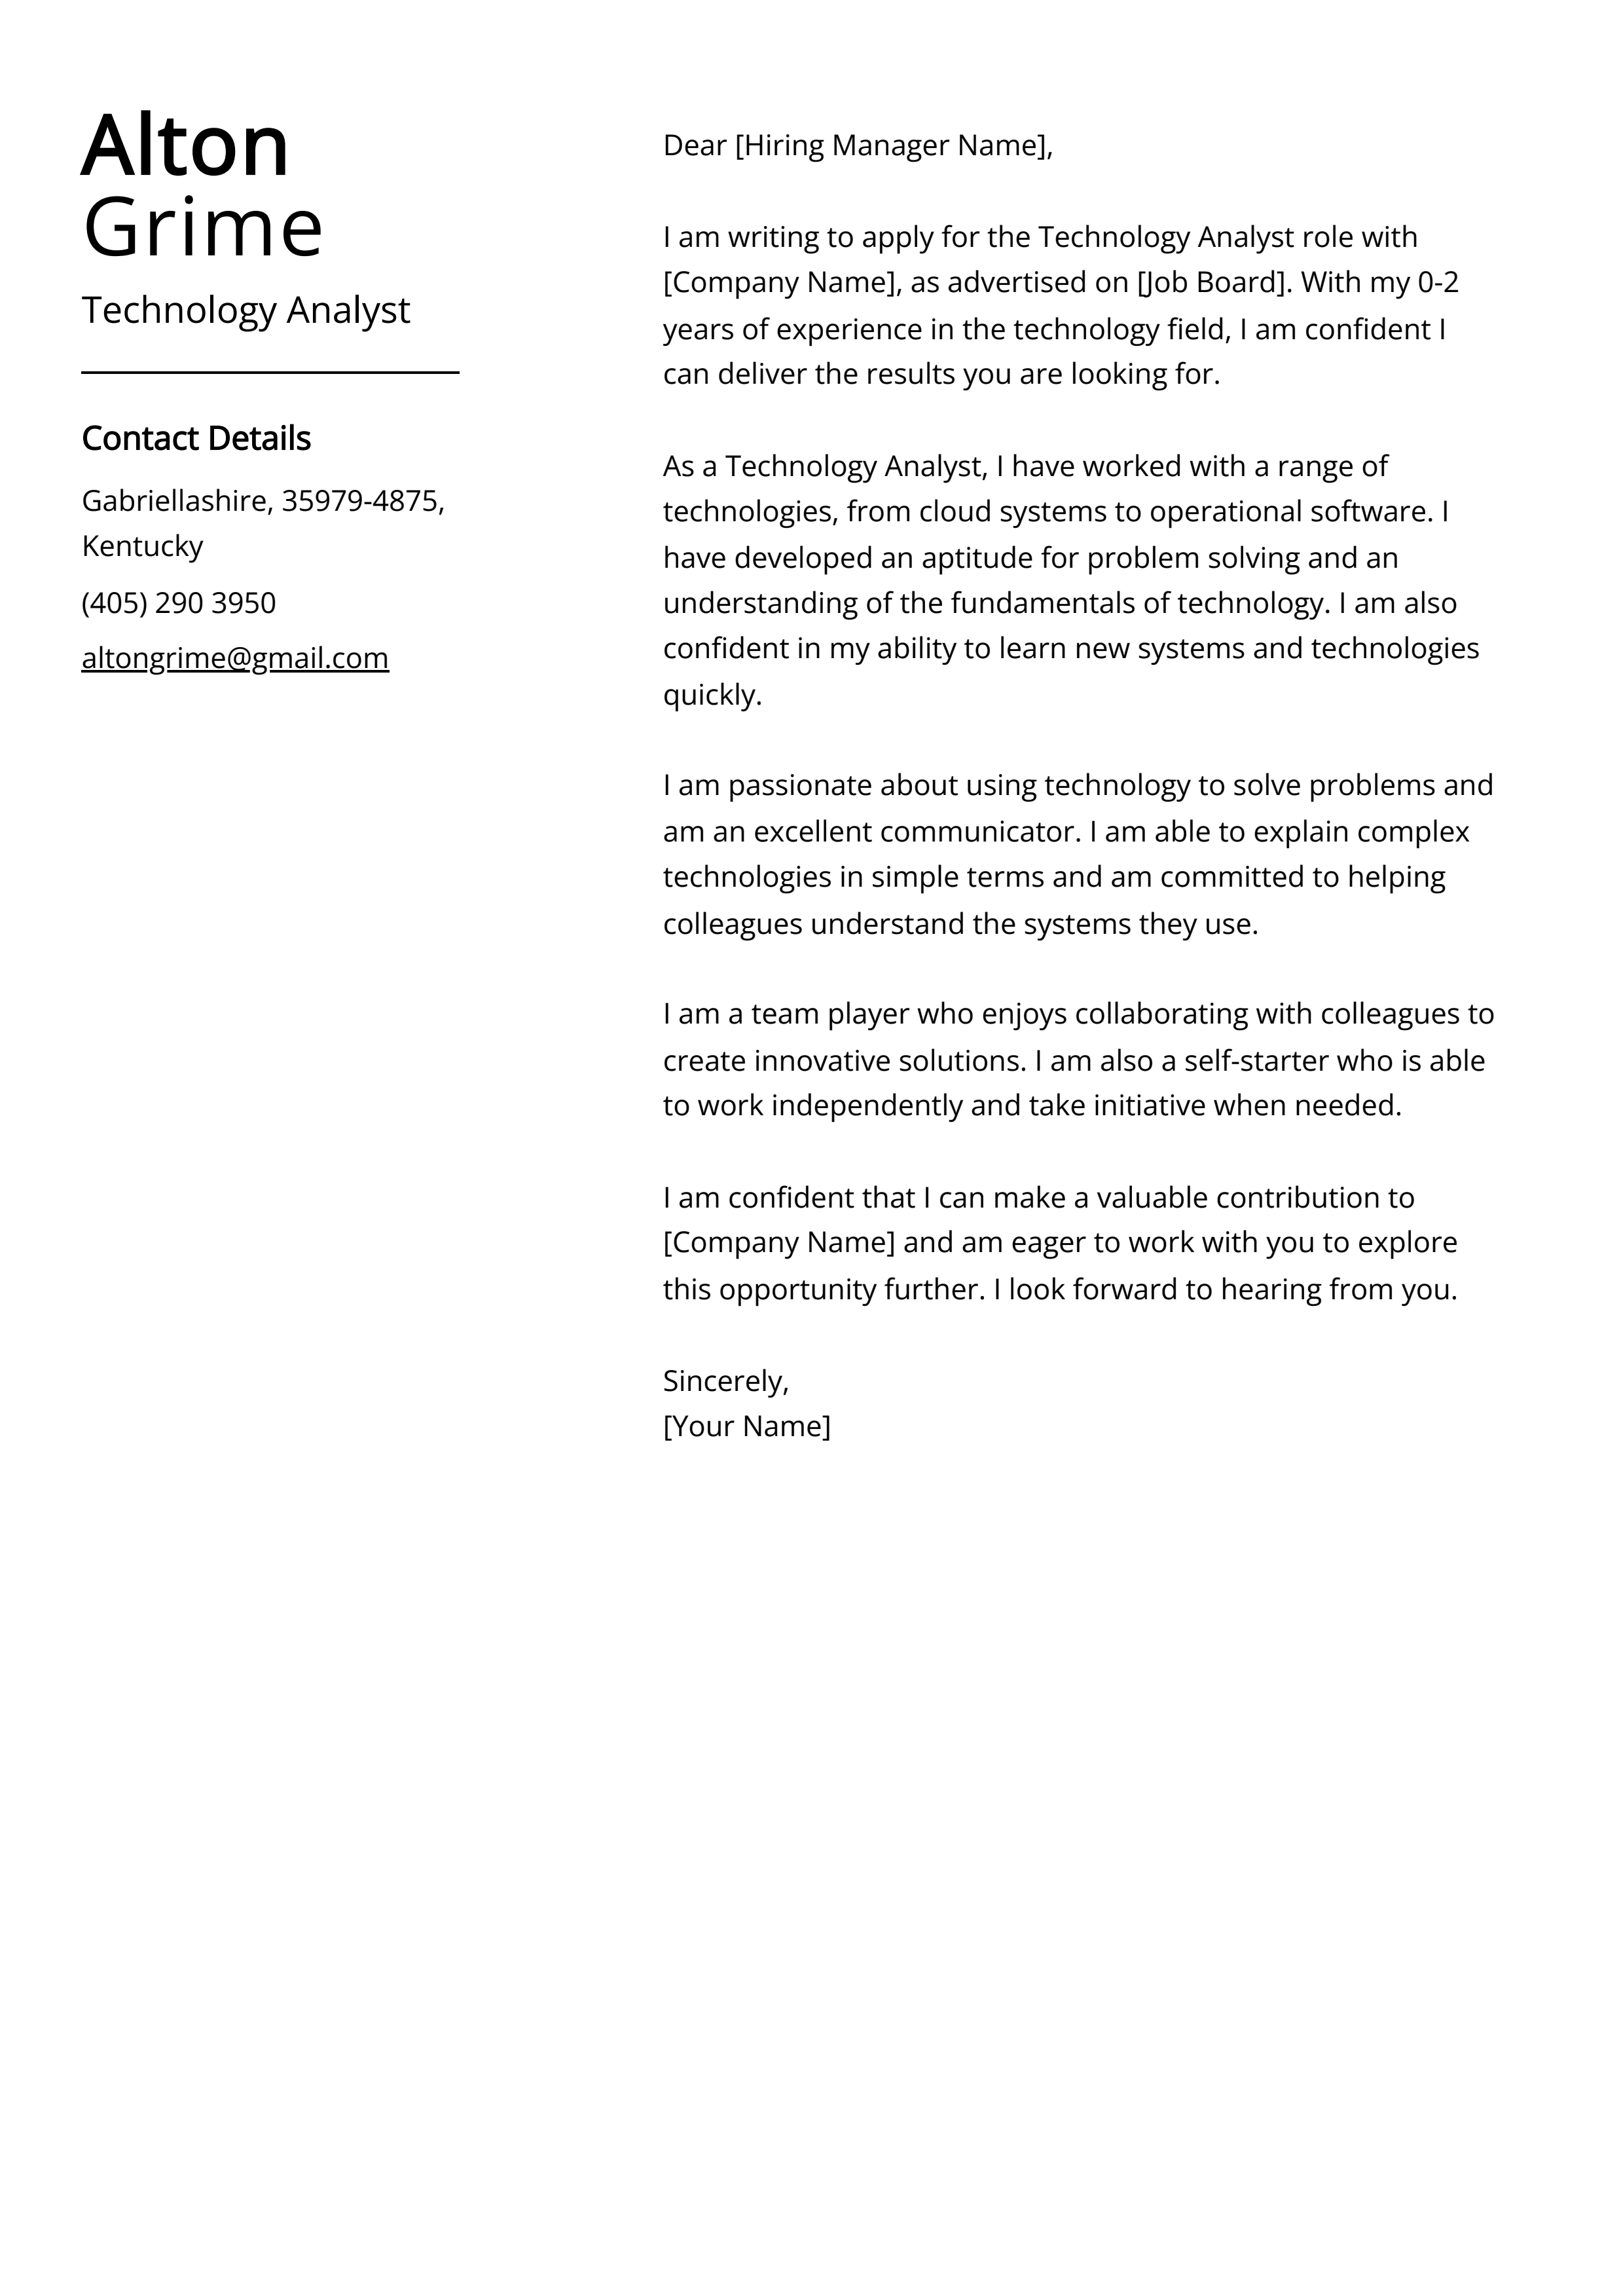 Technology Analyst Cover Letter Example